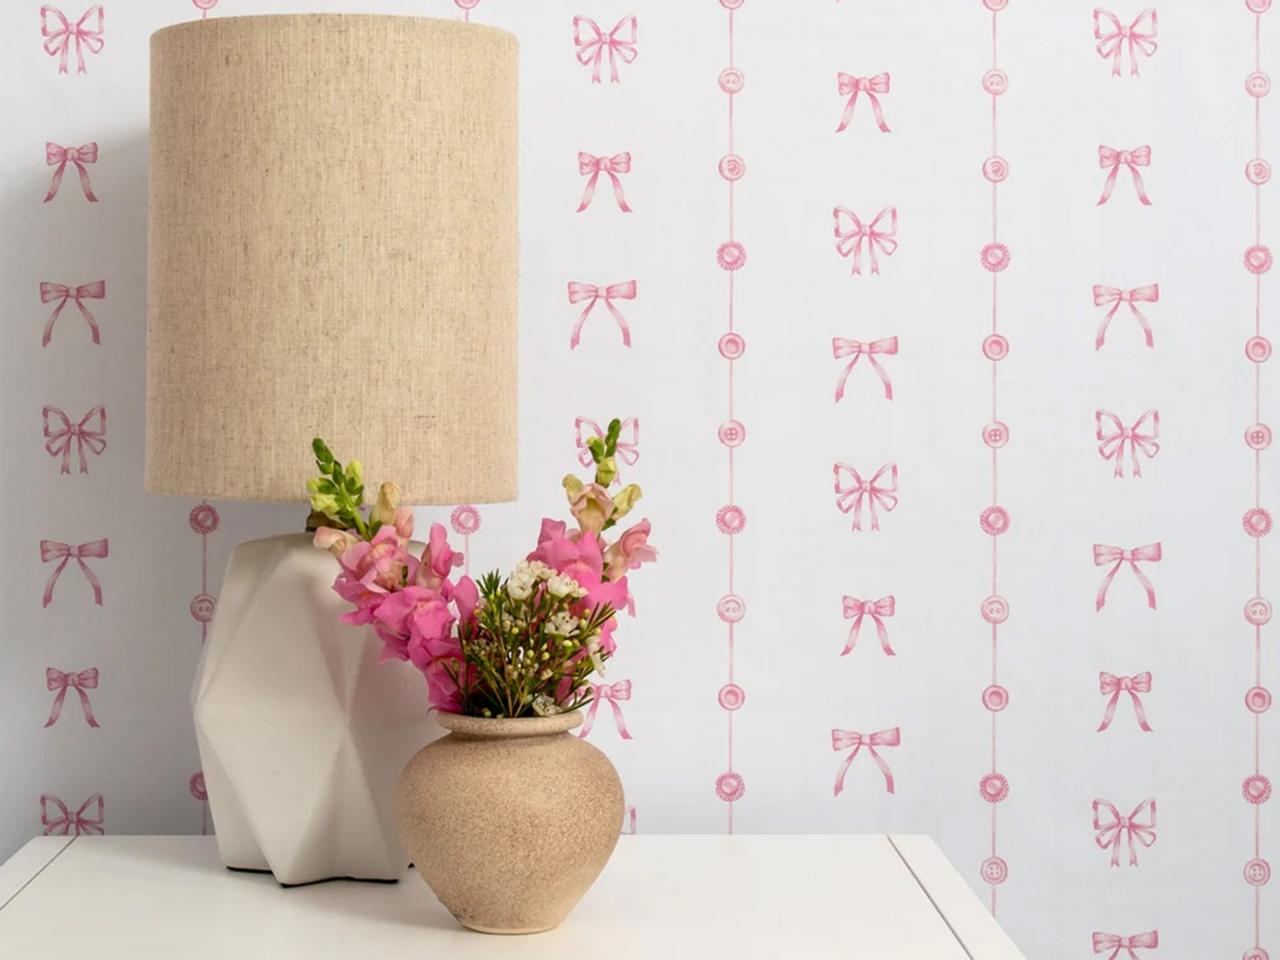 Wallpaper with pink bow and button print